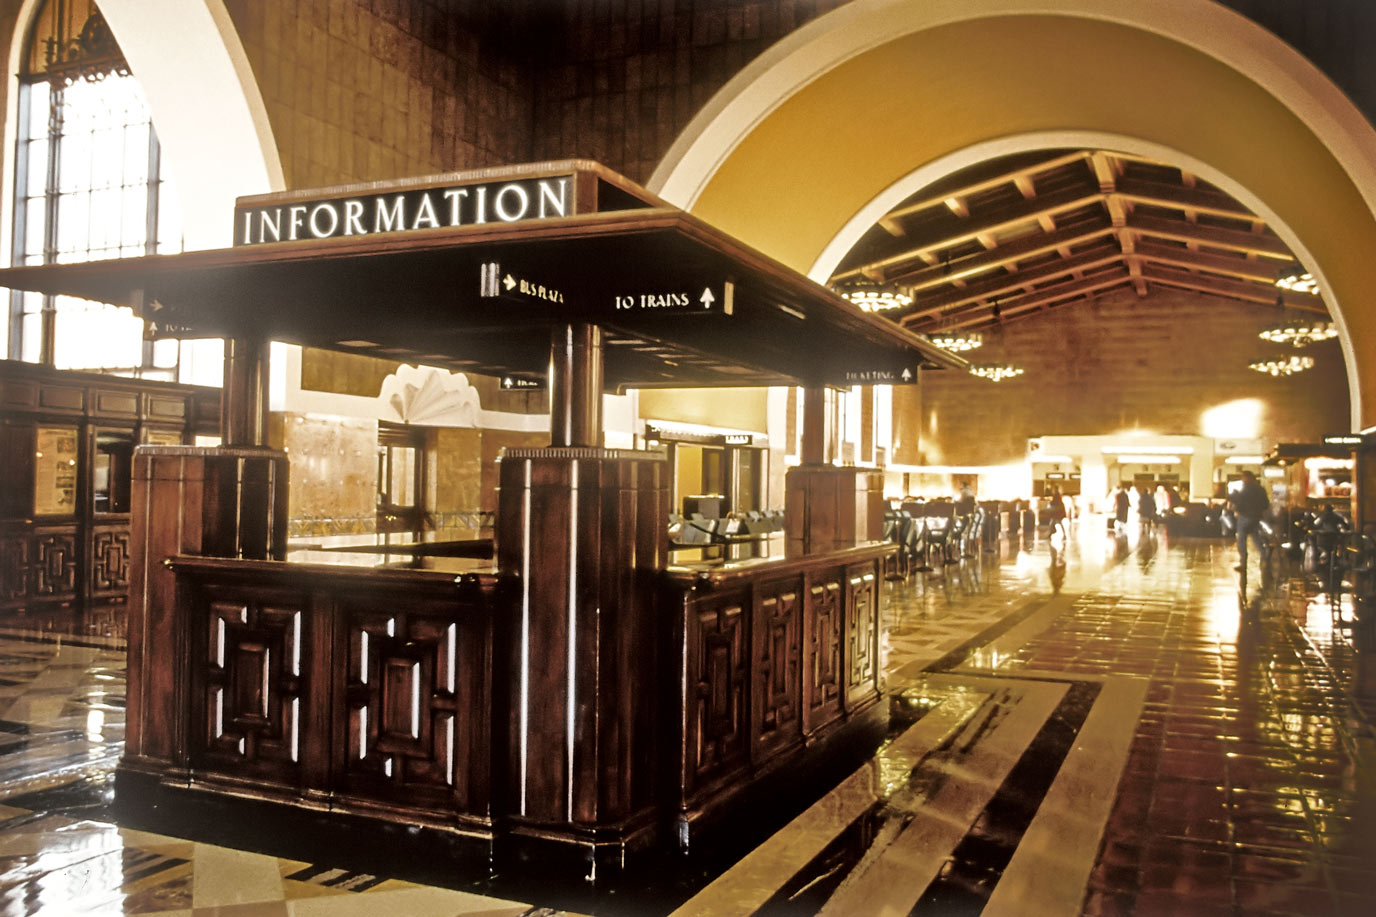 Union Station information booth branding